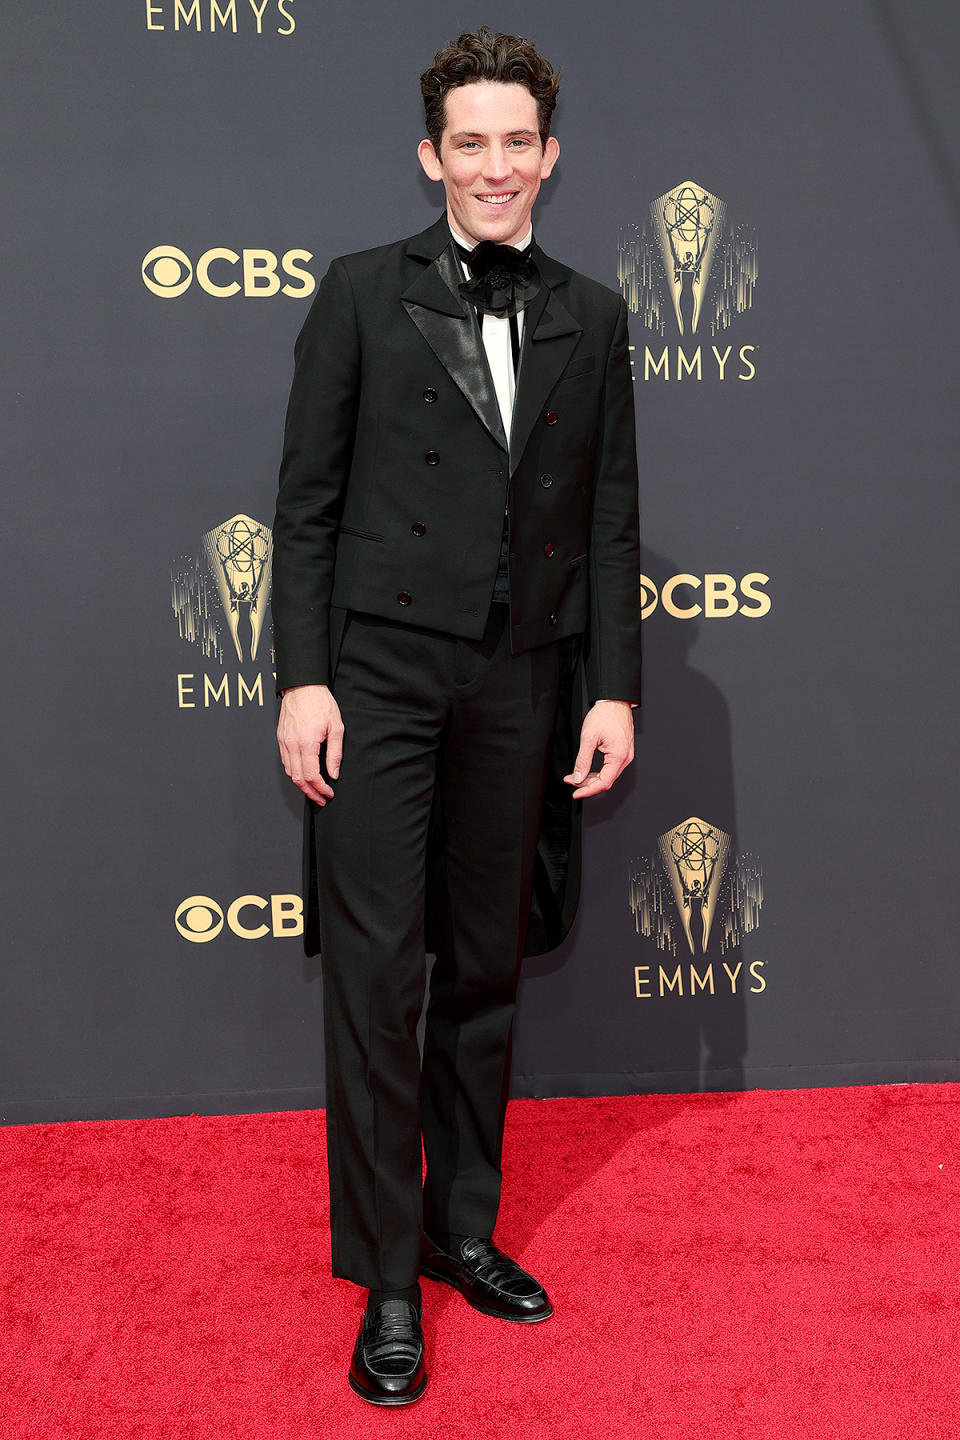 <p>took home the Emmy for outstanding lead actor in a drama series for his portrayal of Prince Charles in <em>The Crown</em>. In his acceptance speech, he shouted out his costar, Emma Corrin, who played opposite him as Lady Diana. </p>